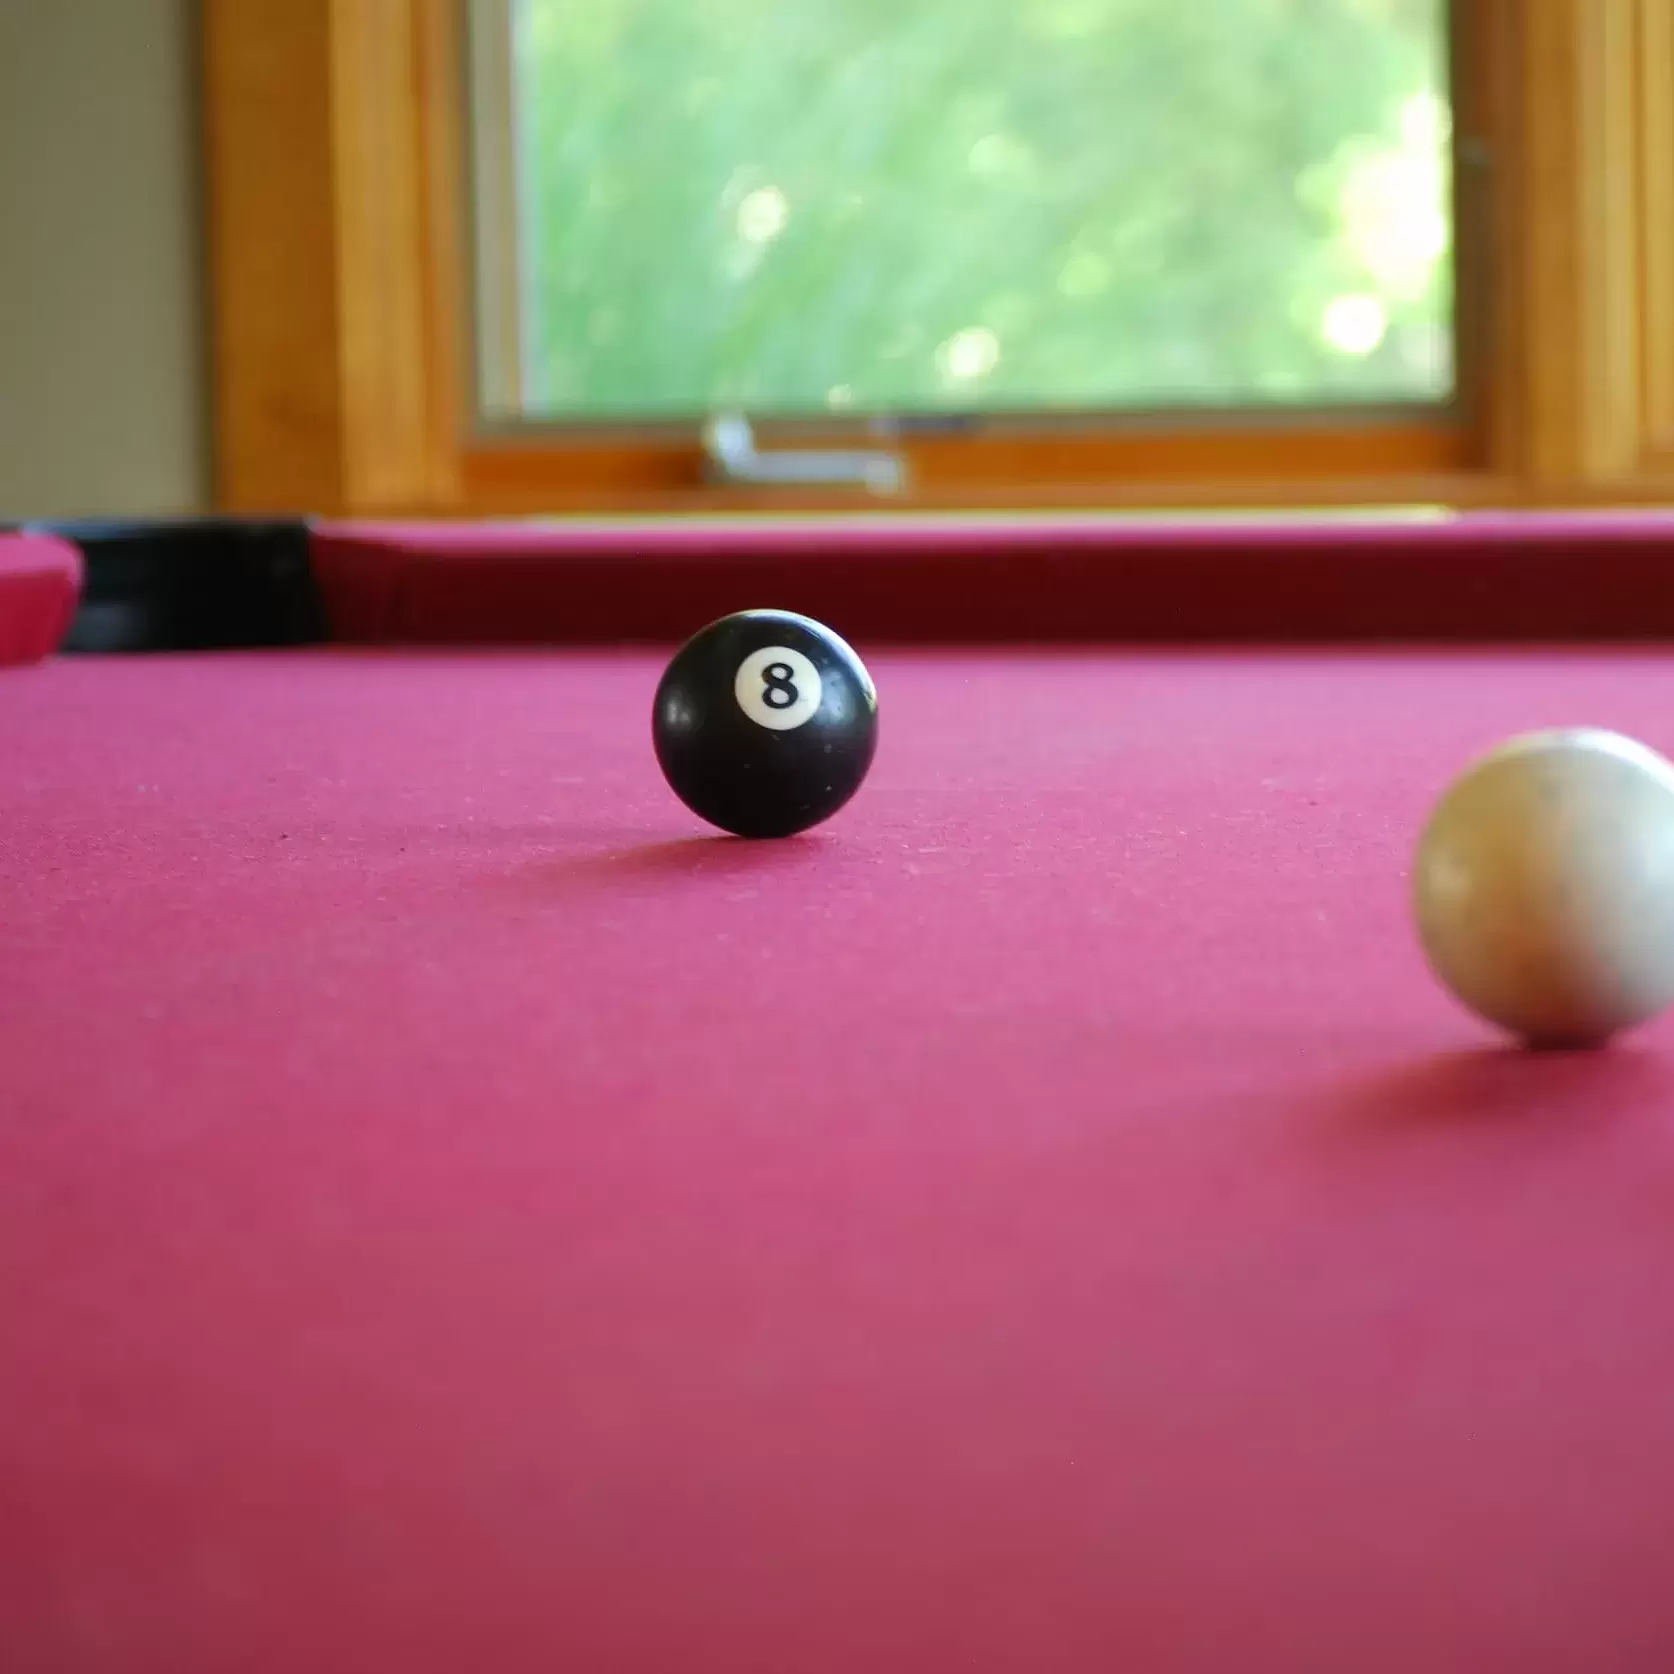 The 8 ball near the pocket on the pool table in the Resident Hub.